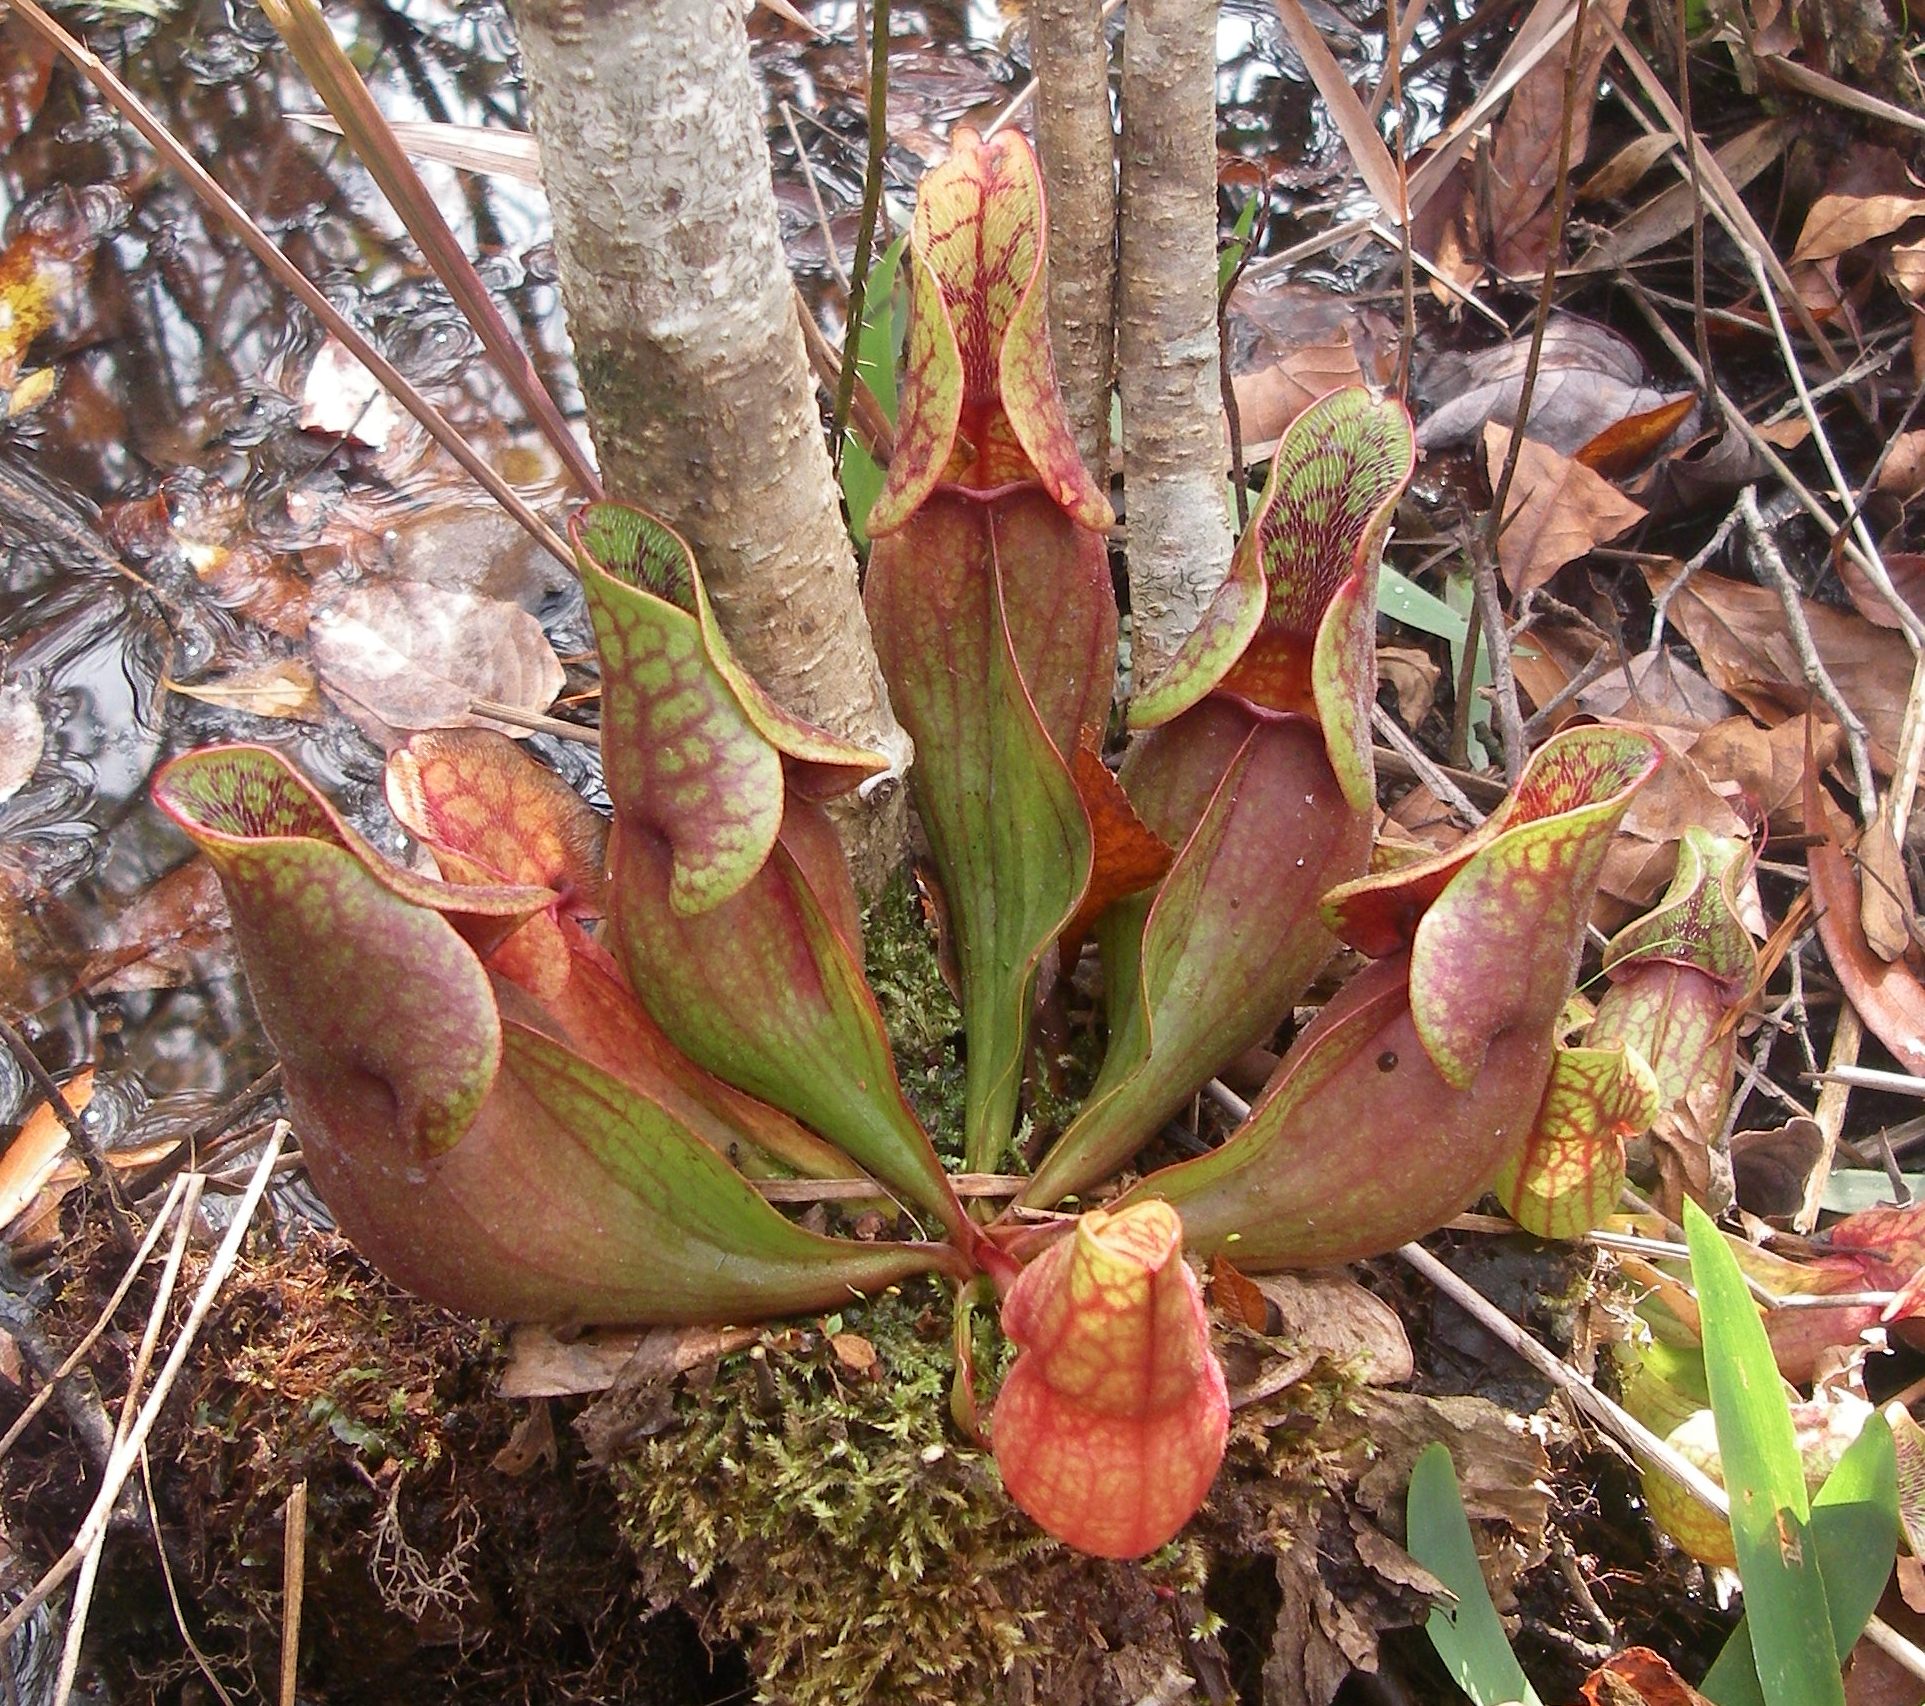 Pitchers of a purple pitcher plant rest at the bottom of a tree amidst leaves.